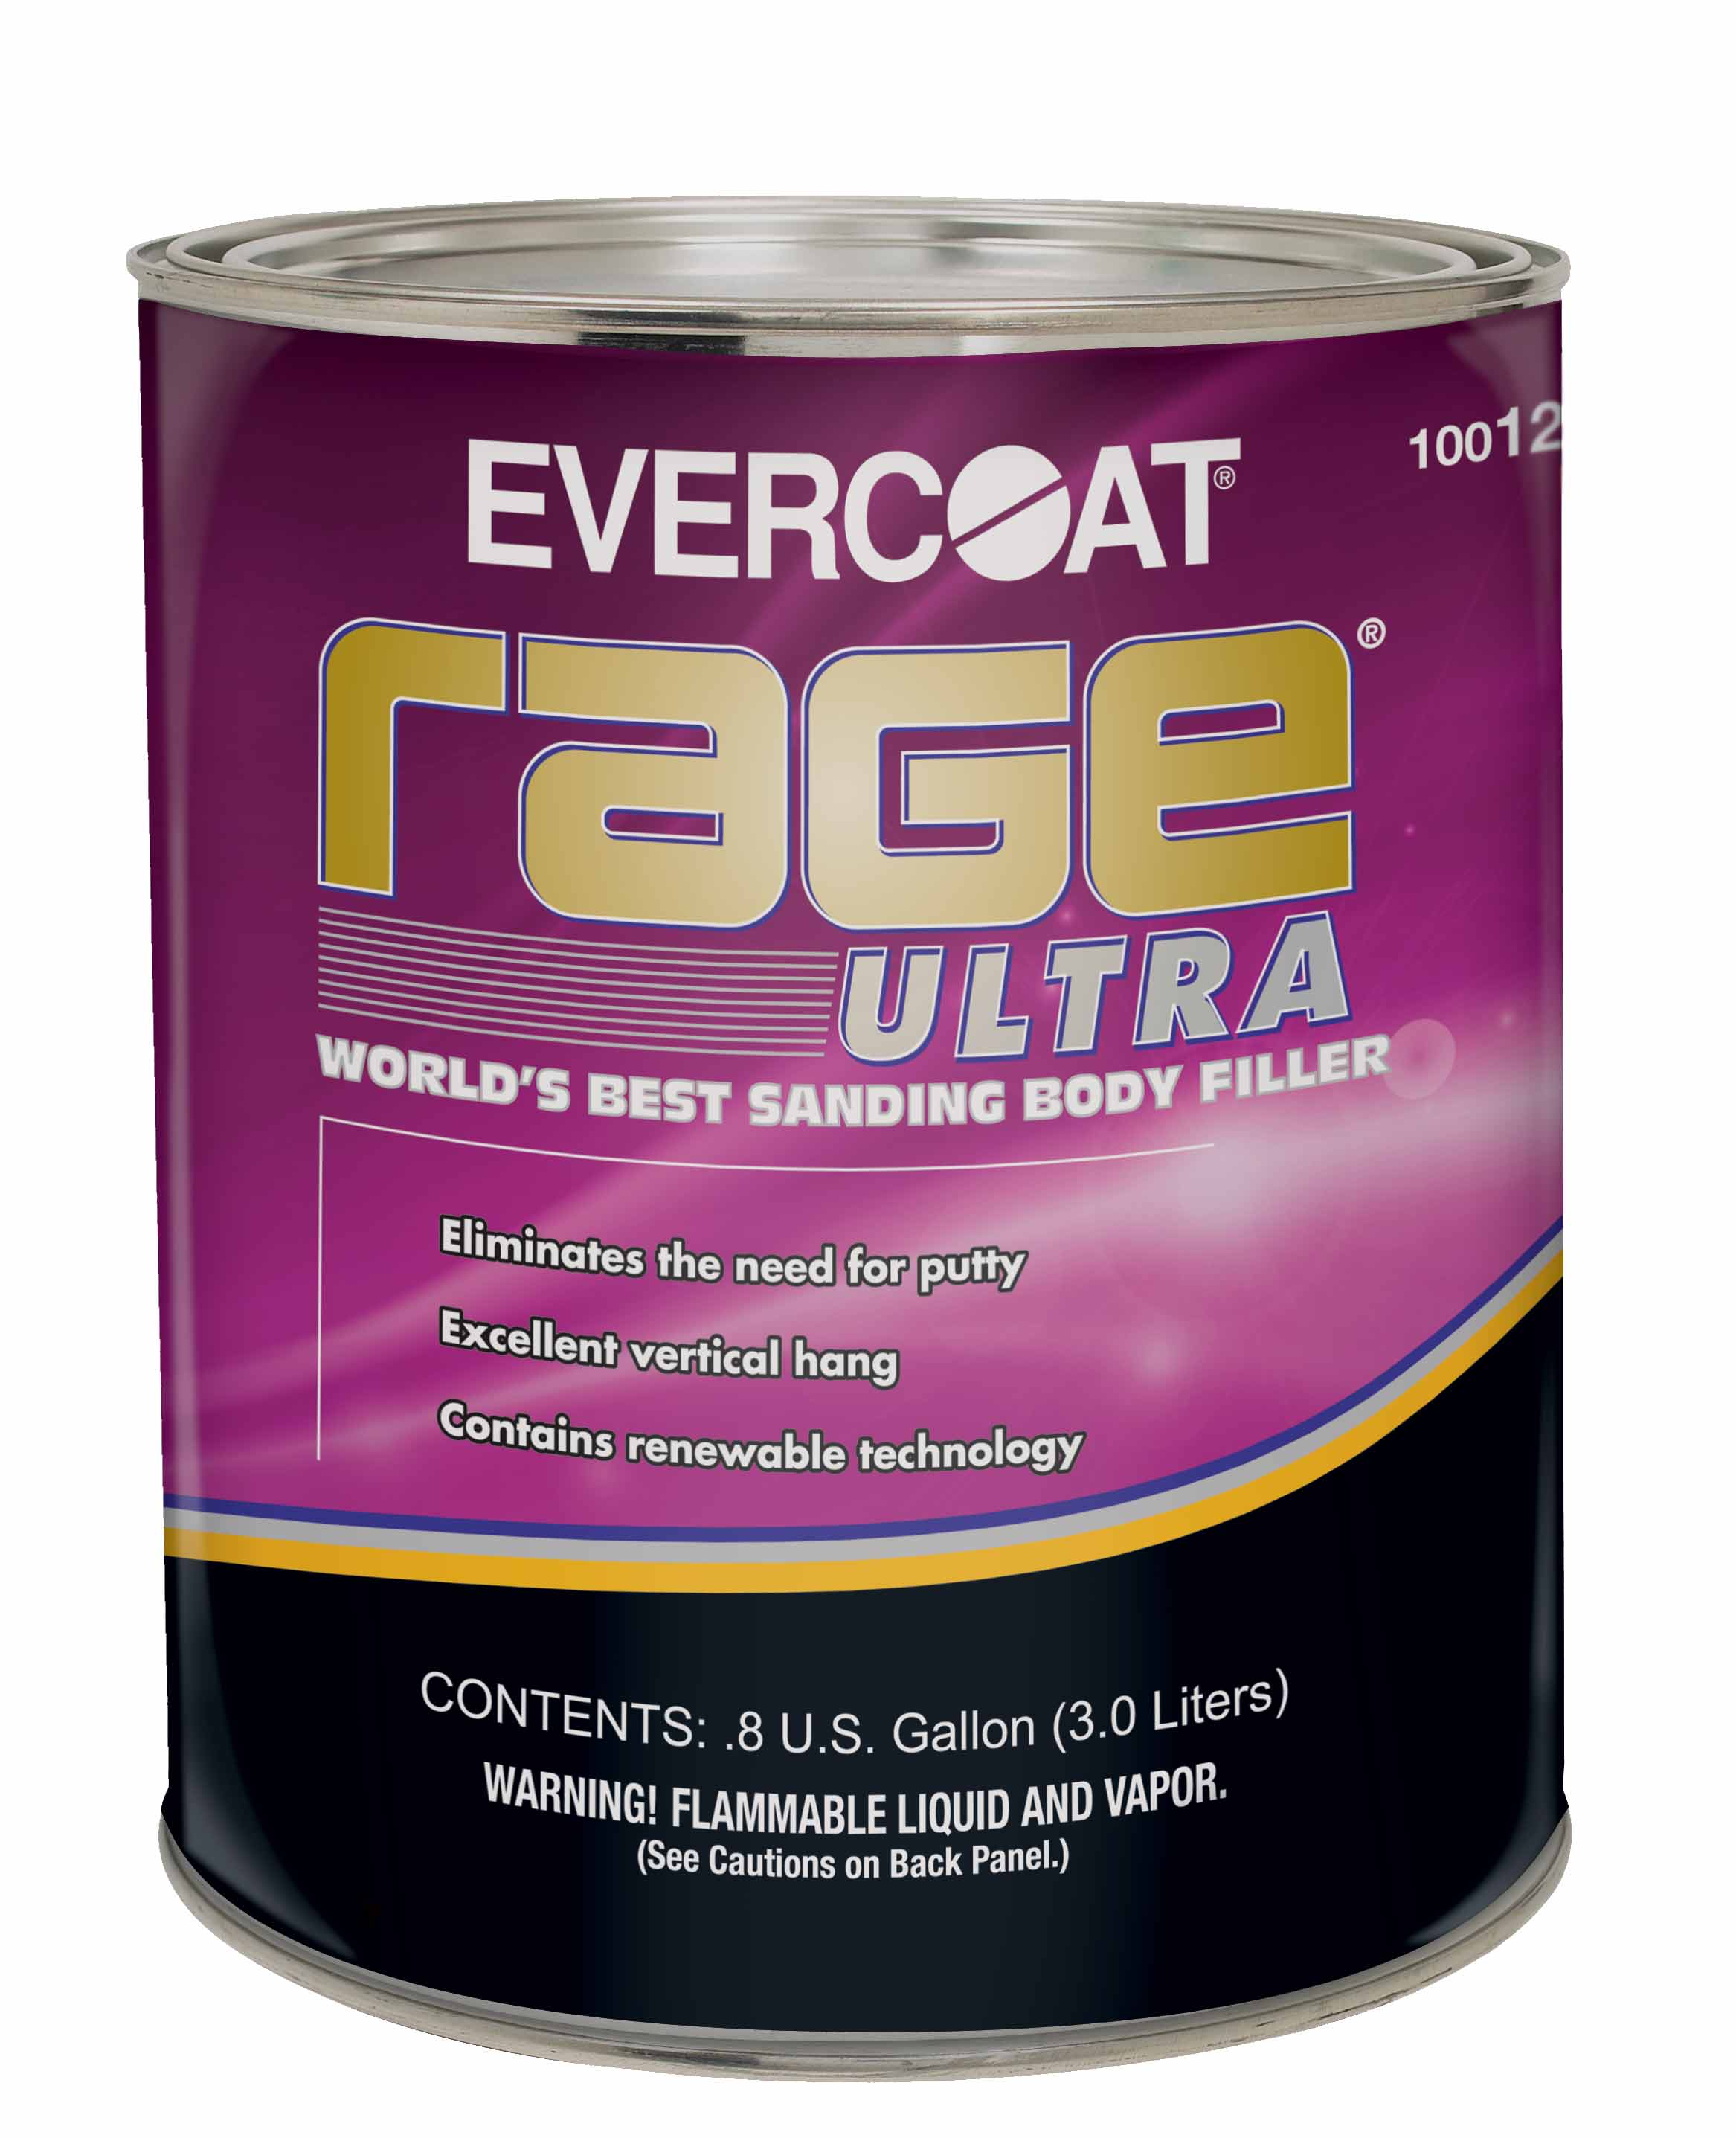 Rage® Ultra is the world’s best sanding body filler. Its non-sag formula has excellent filling properties, while eliminating the need for finishing putty.